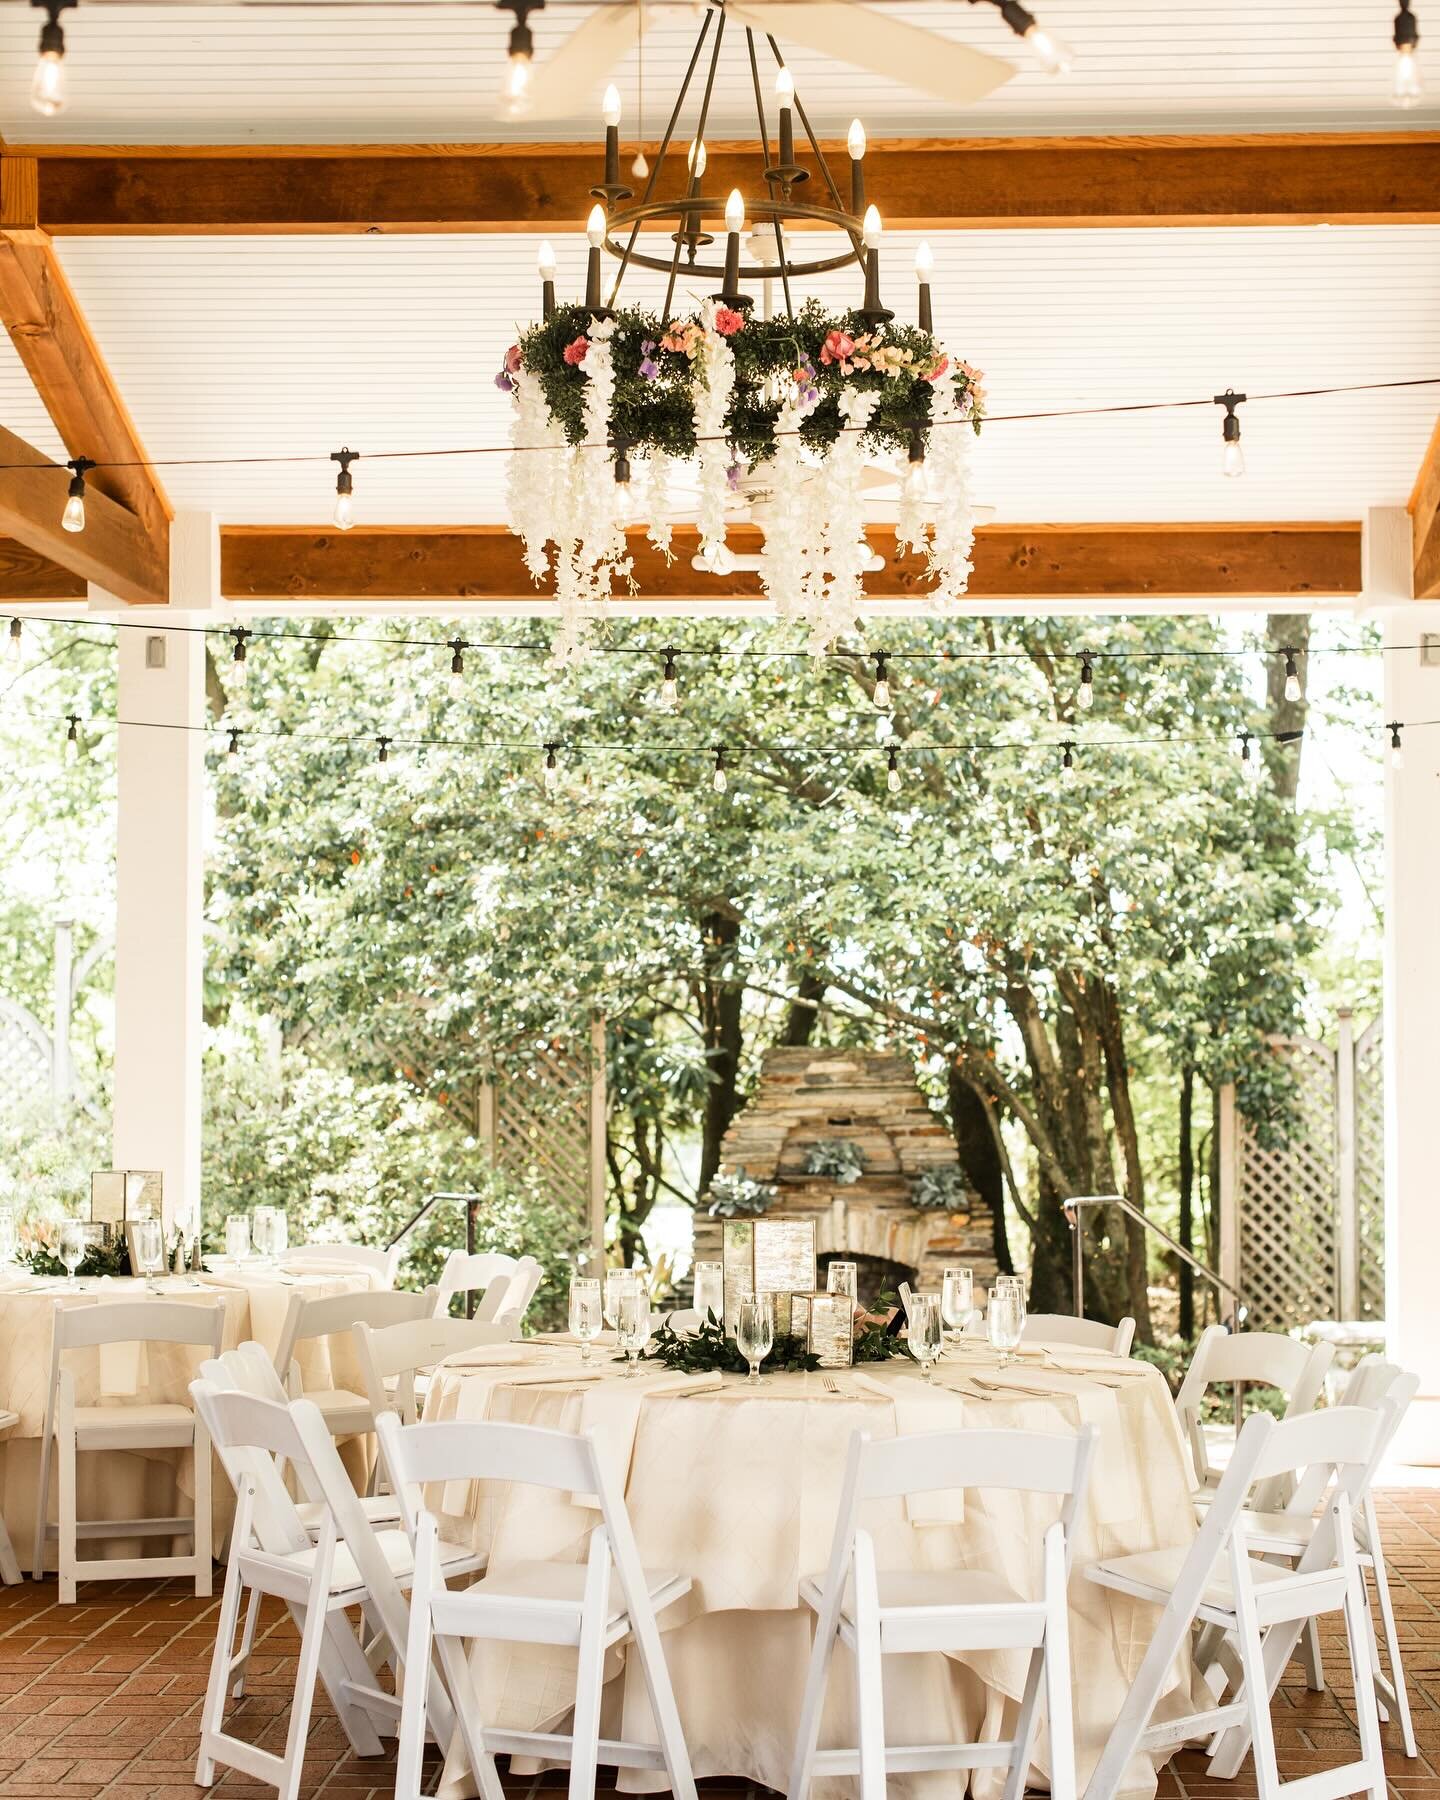 Spring weddings at Flint Hill are simply stunning. A reception set under the pavilion is magical during these perfect months 🌸

Photo:@theblumes
Venue: @flinthillweddings
Floral + Decor: @adedesignstudio
Catering + Service: @a_divine_event

#flinthi